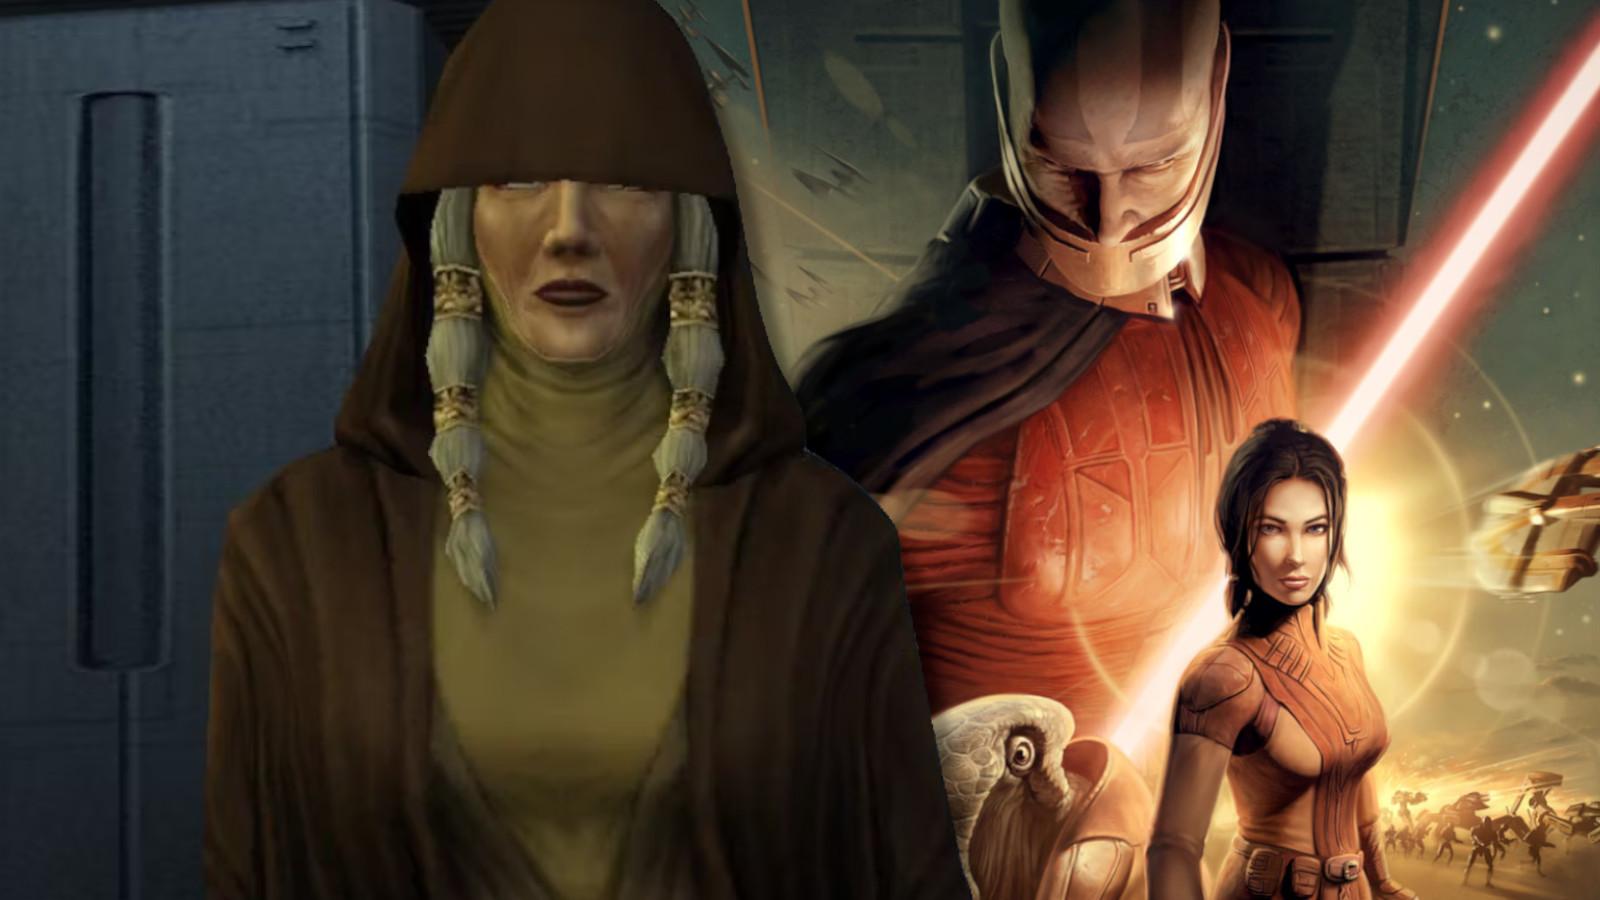 Characters from Knights of the Old Republic in Star Wars